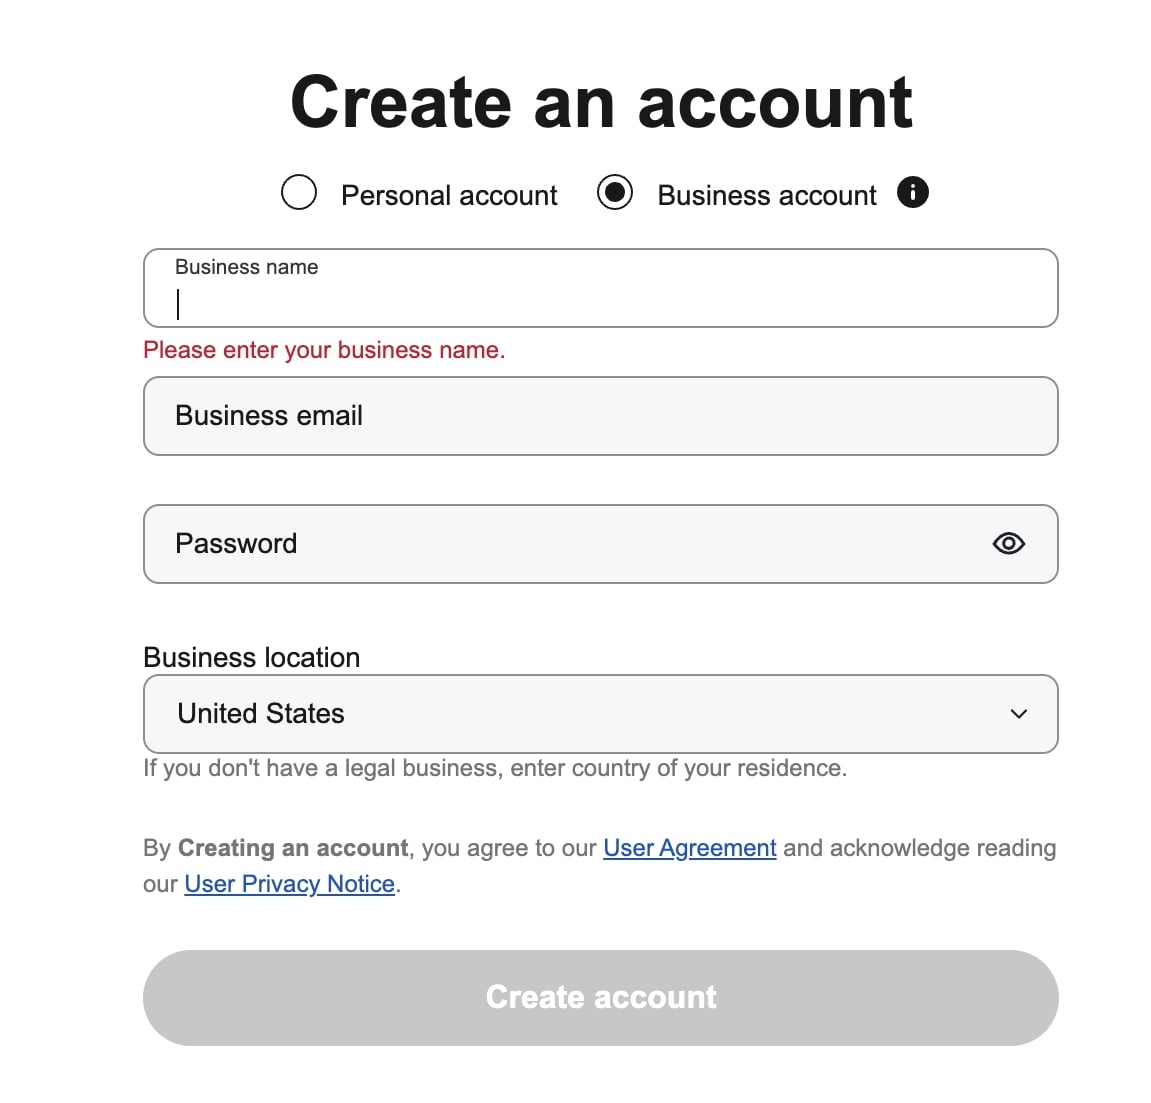 The "Register" section on the eBay page with the option "Business account" selected and fields for filling in your business name, email, location, and password. A grey button with the text "Create account" in white is placed in the lower area.